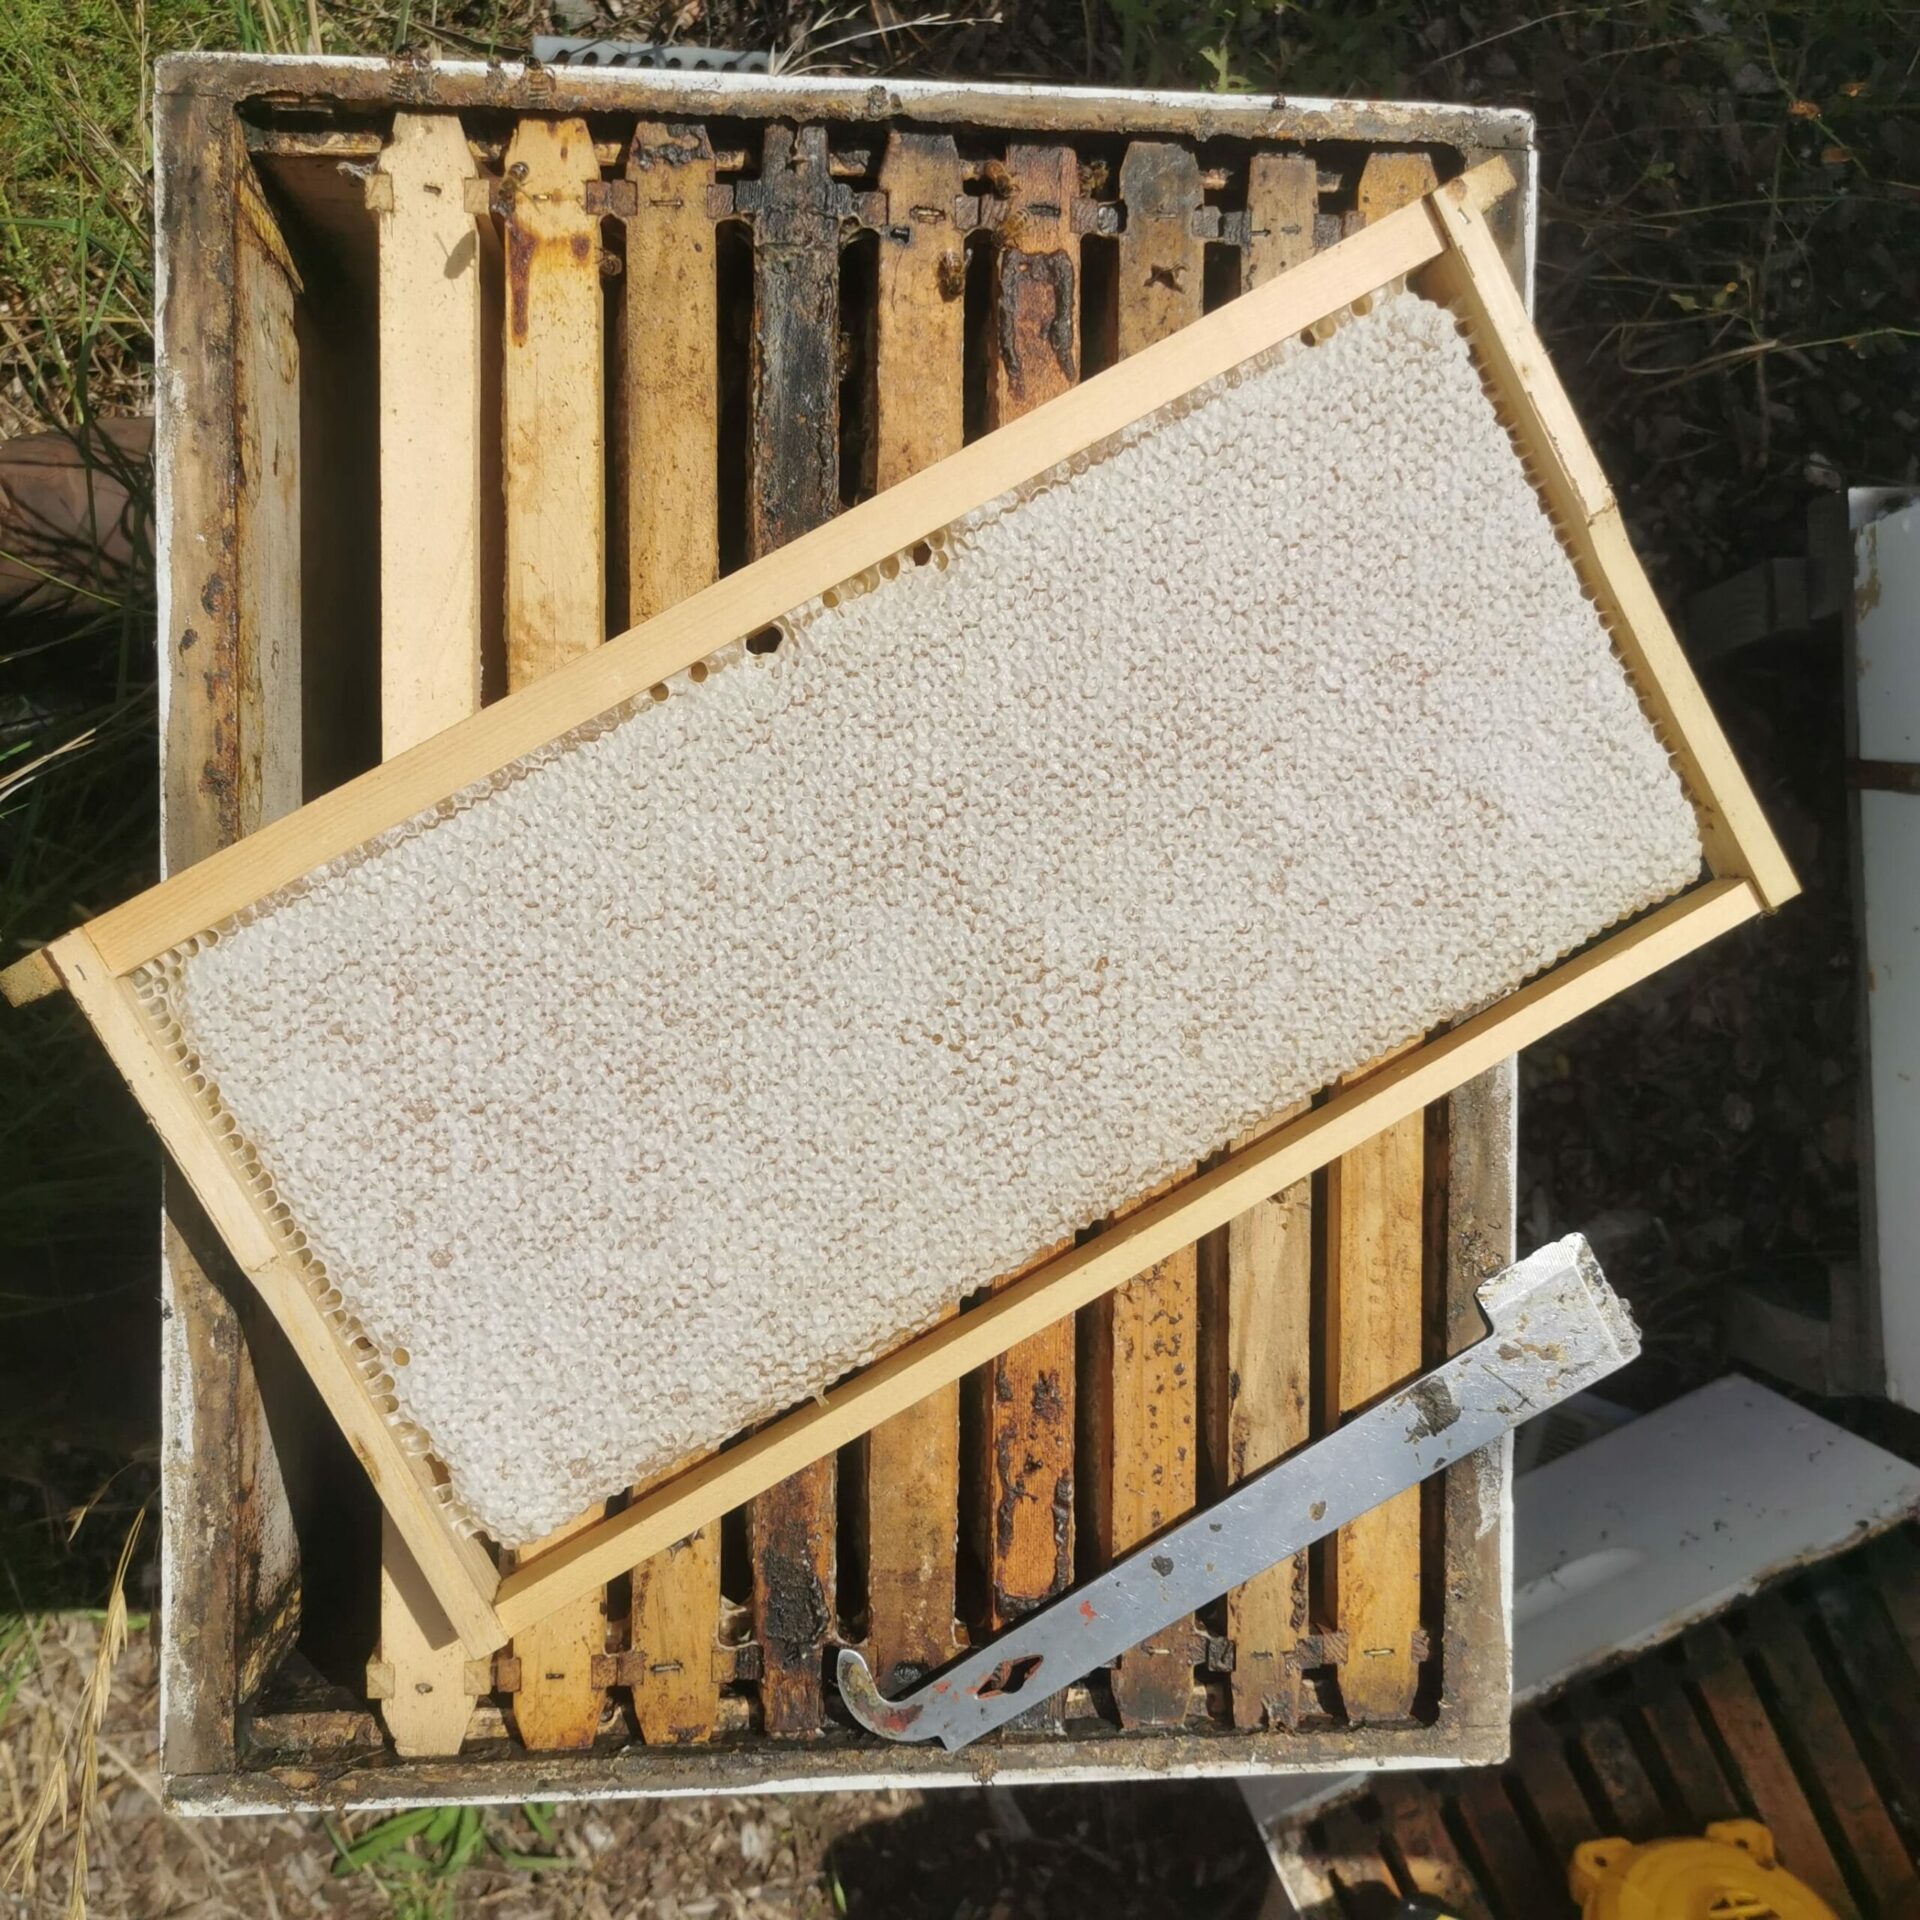 Urban Beehive beekeeping equipment, including honey frames, hives and more.